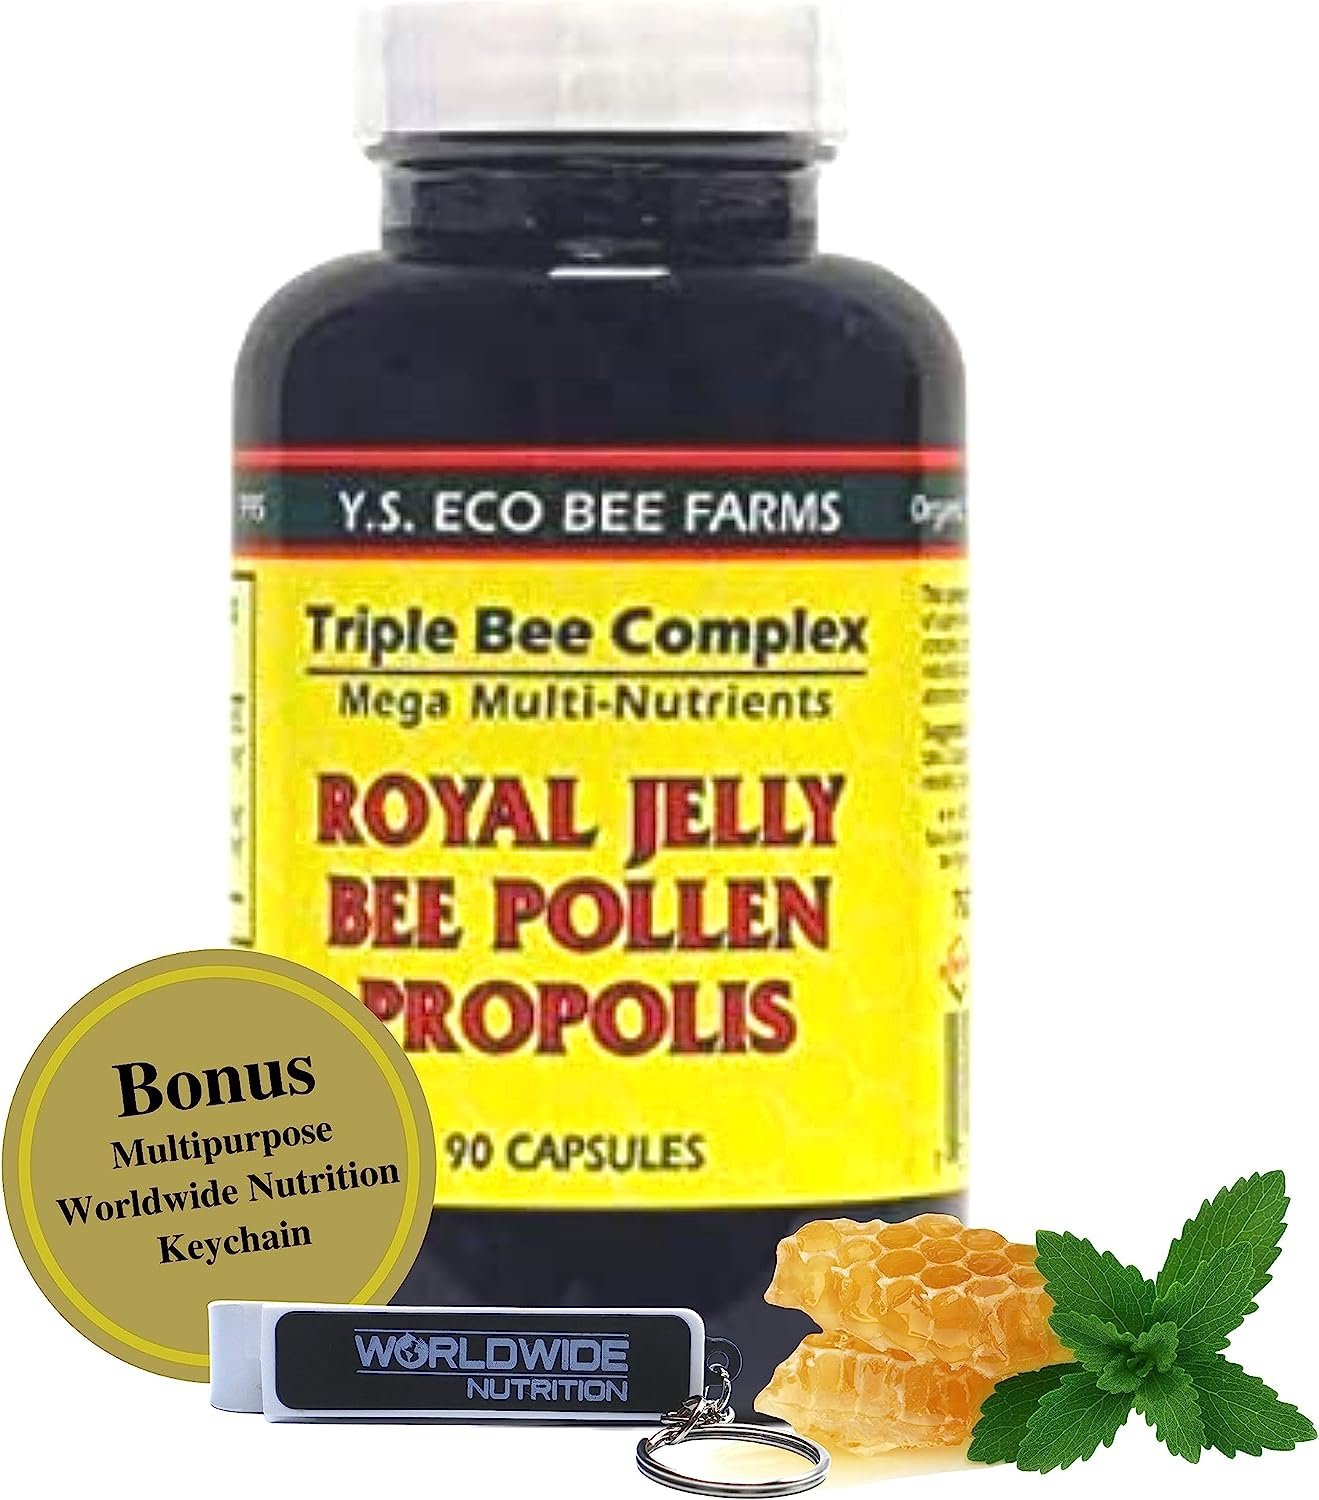 YS Organics Triple Bee Complex, Royal Jelly, Bee Pollen, Propolis - The Power of Nature Packed in 90 Capsules with Bonus worldwidenutrition Multi Purpose Key Chain